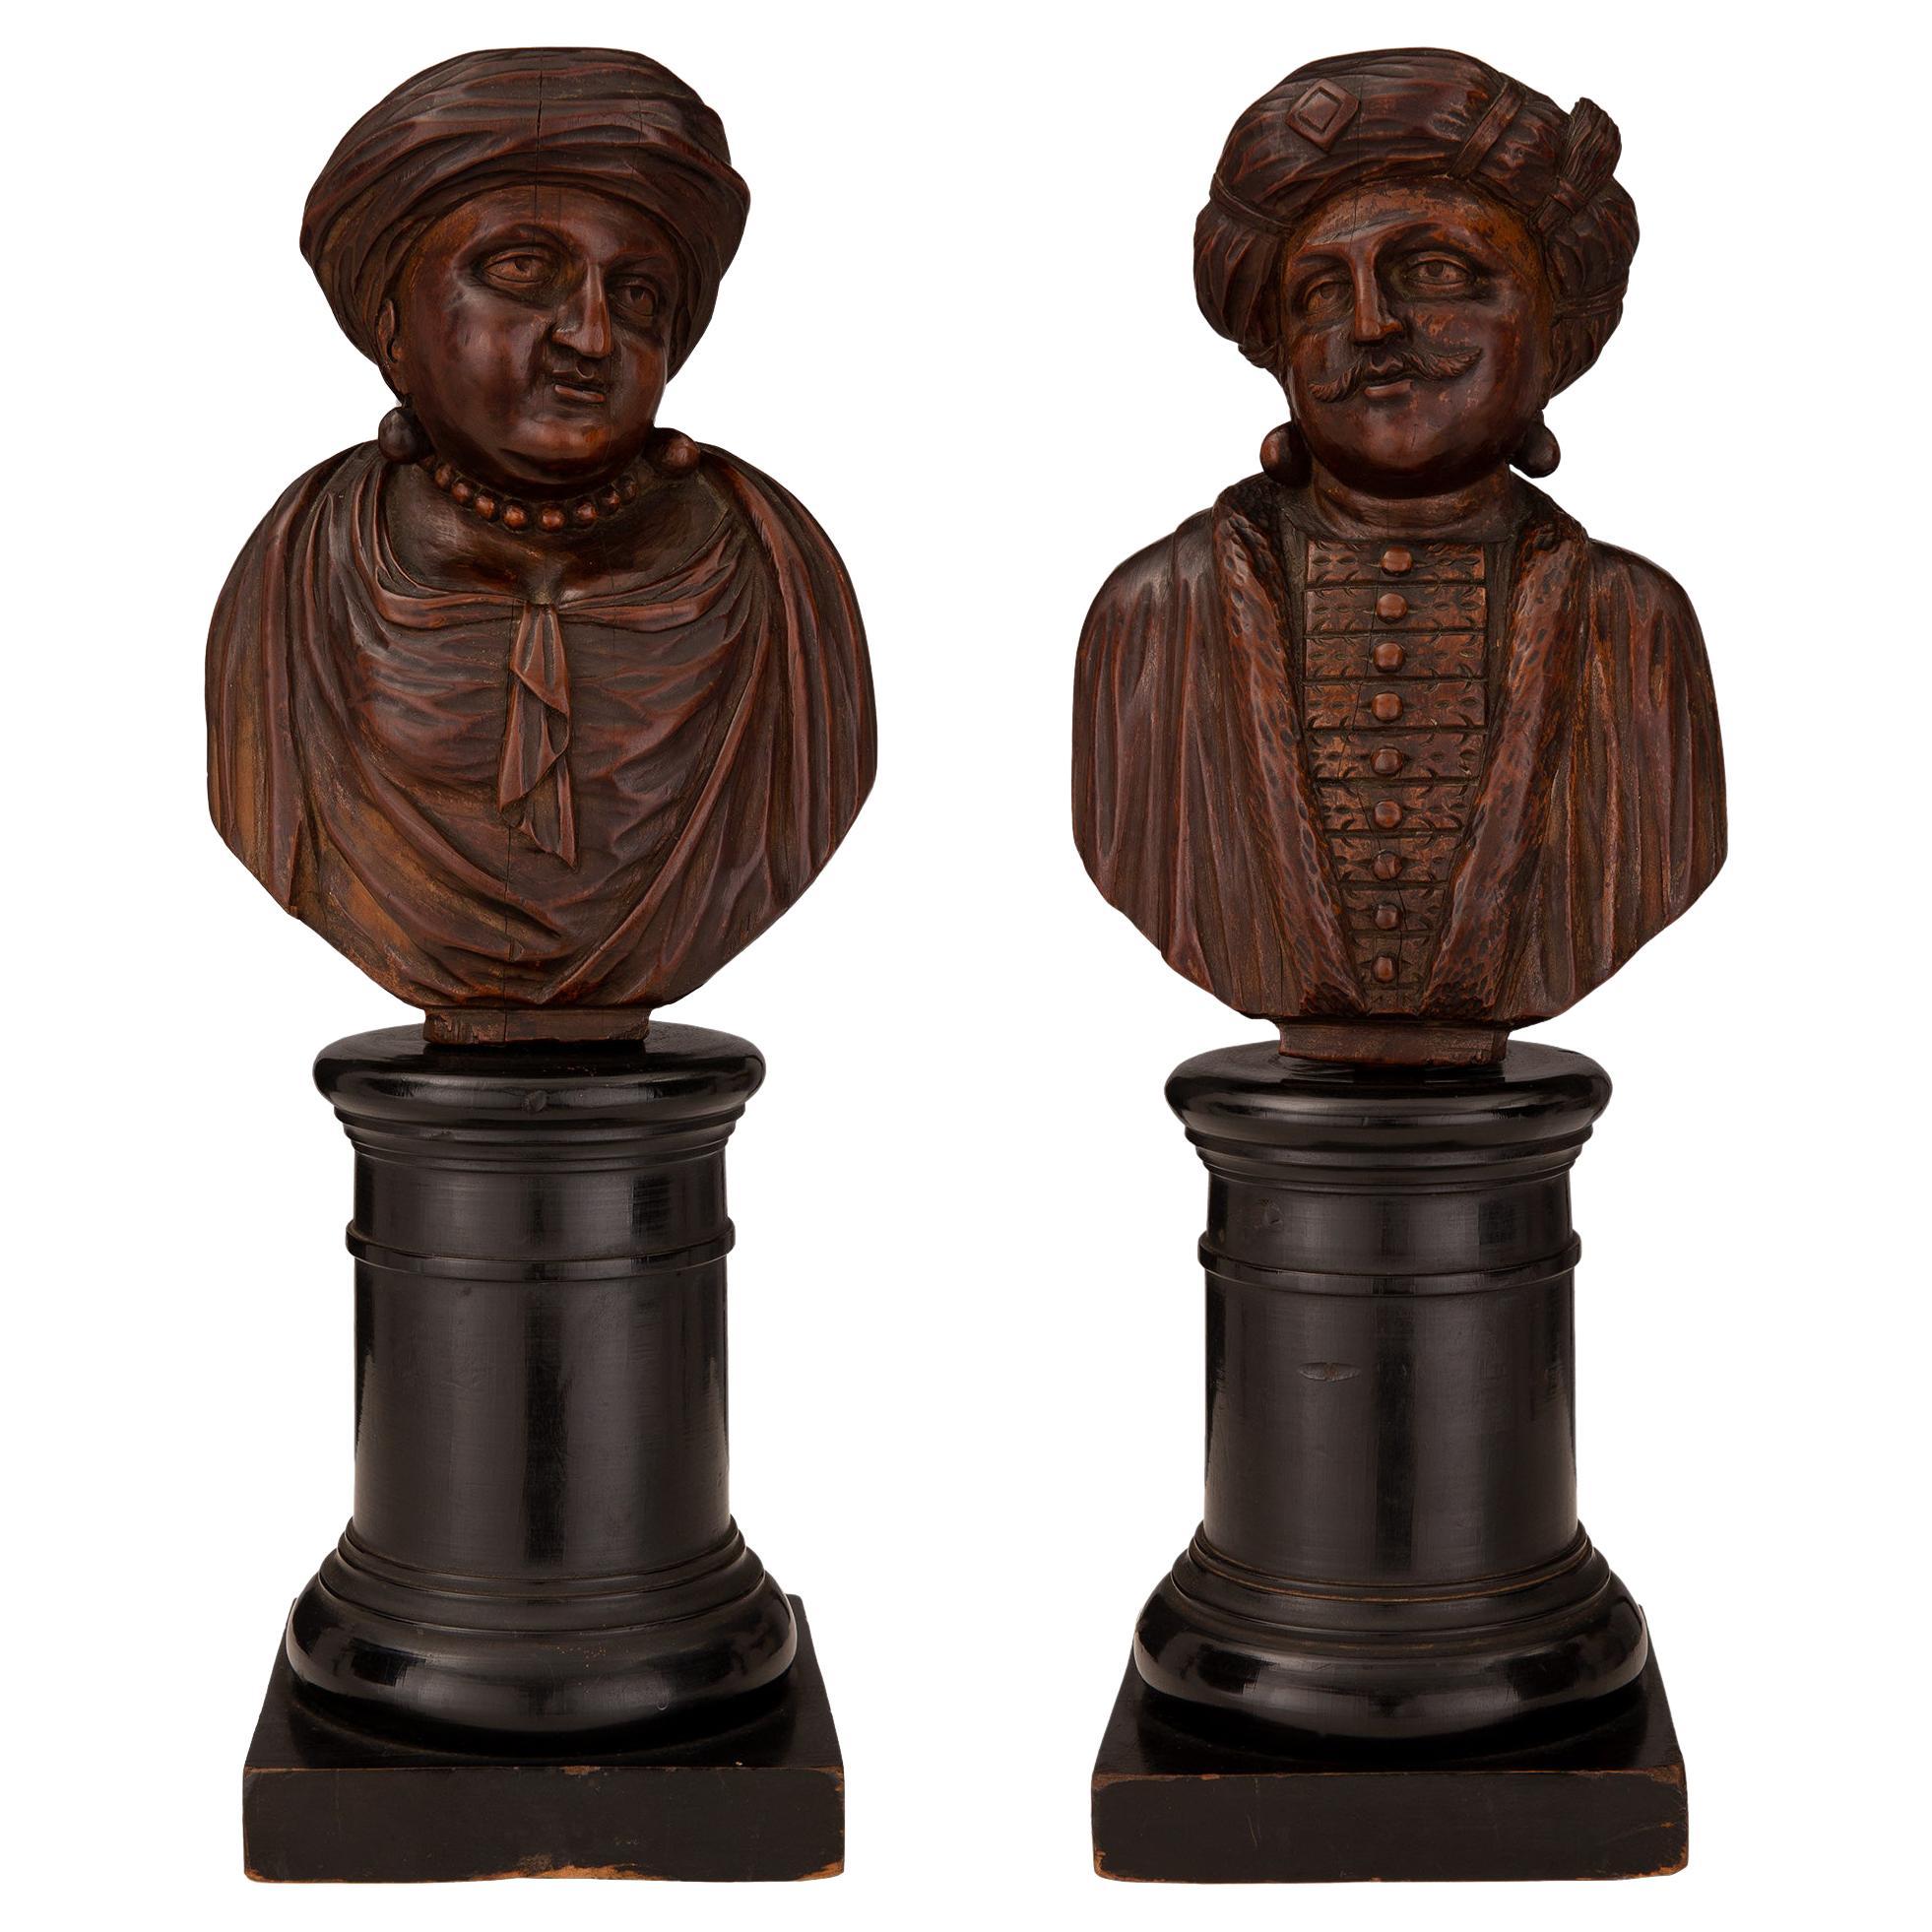 Pair of Early 19th Century Carved Walnut and Fruitwood Busts of Turkish Nobles